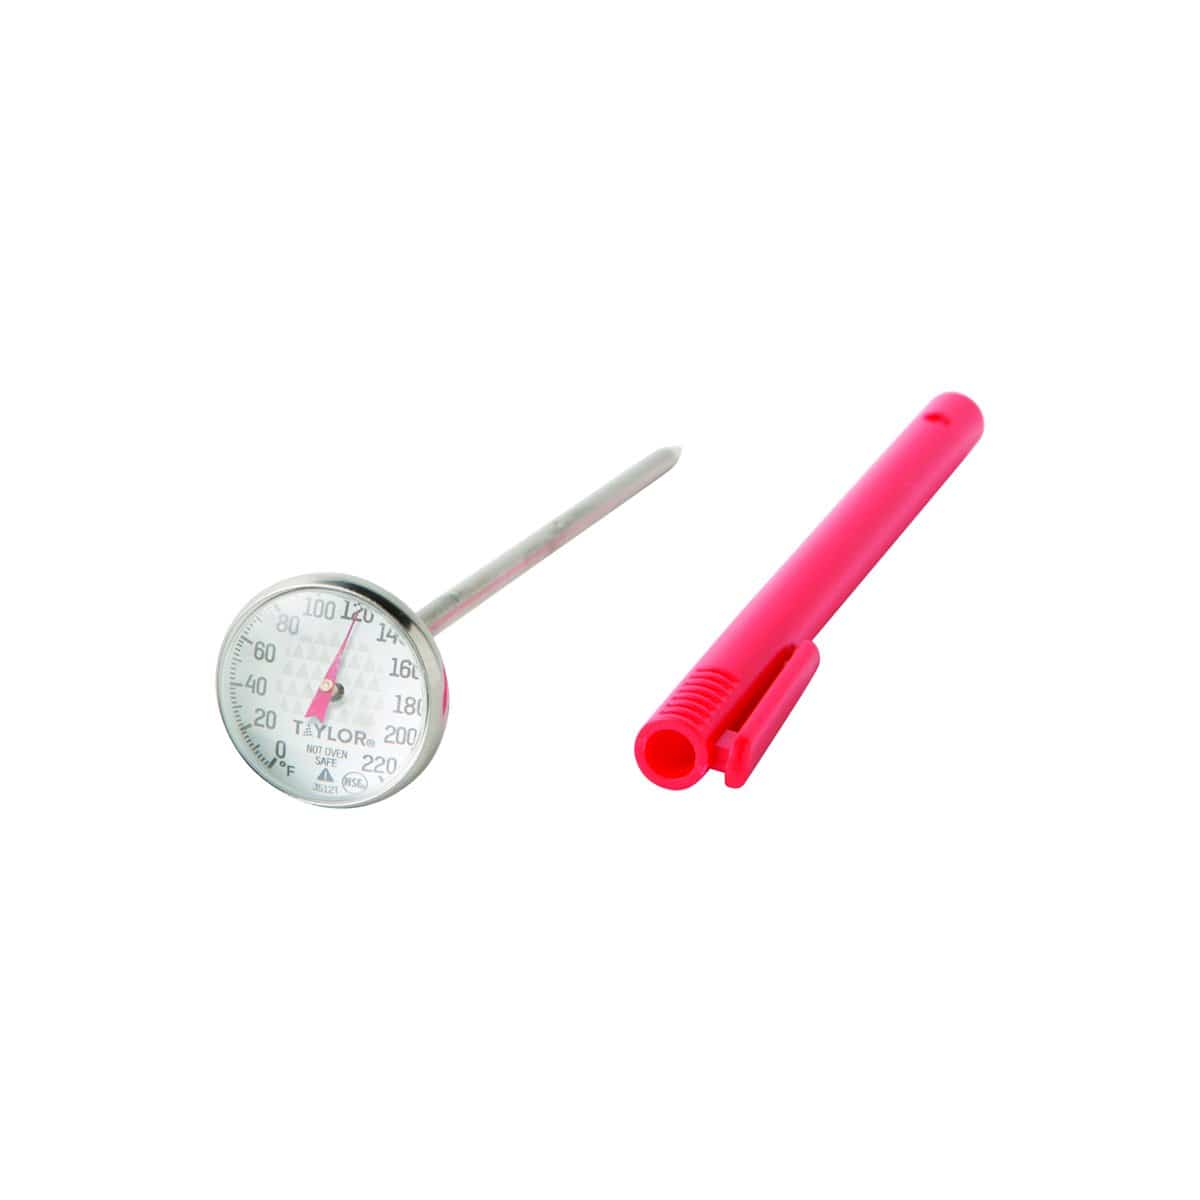 Taylor Thermometer, Oven